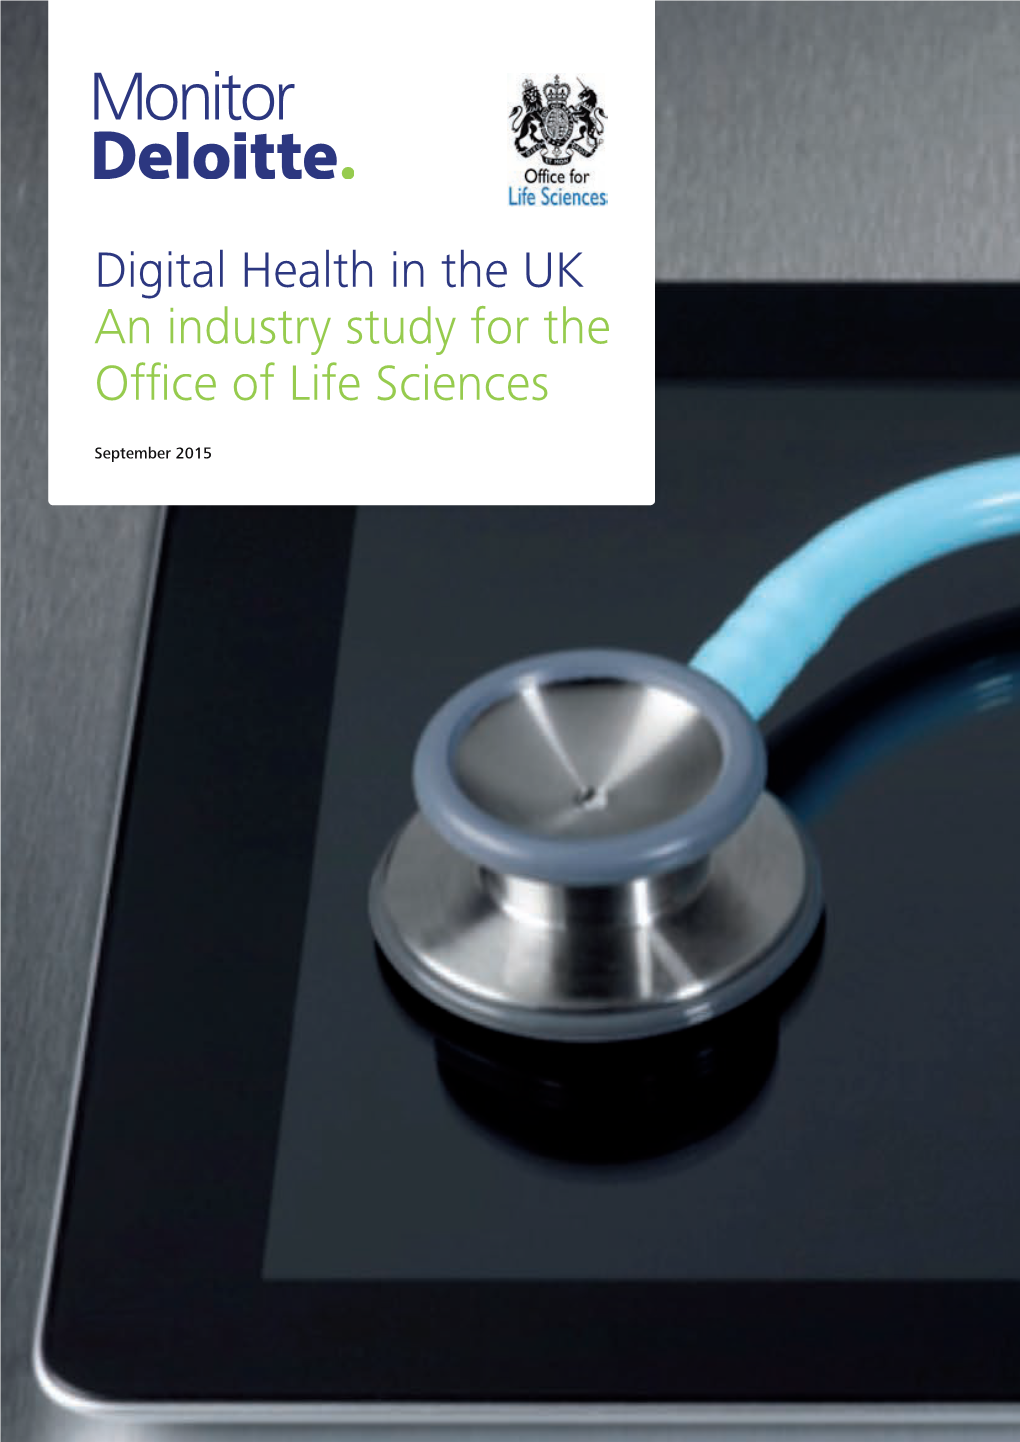 Digital Health in the UK: an Industry Study for the Office of Life Sciences